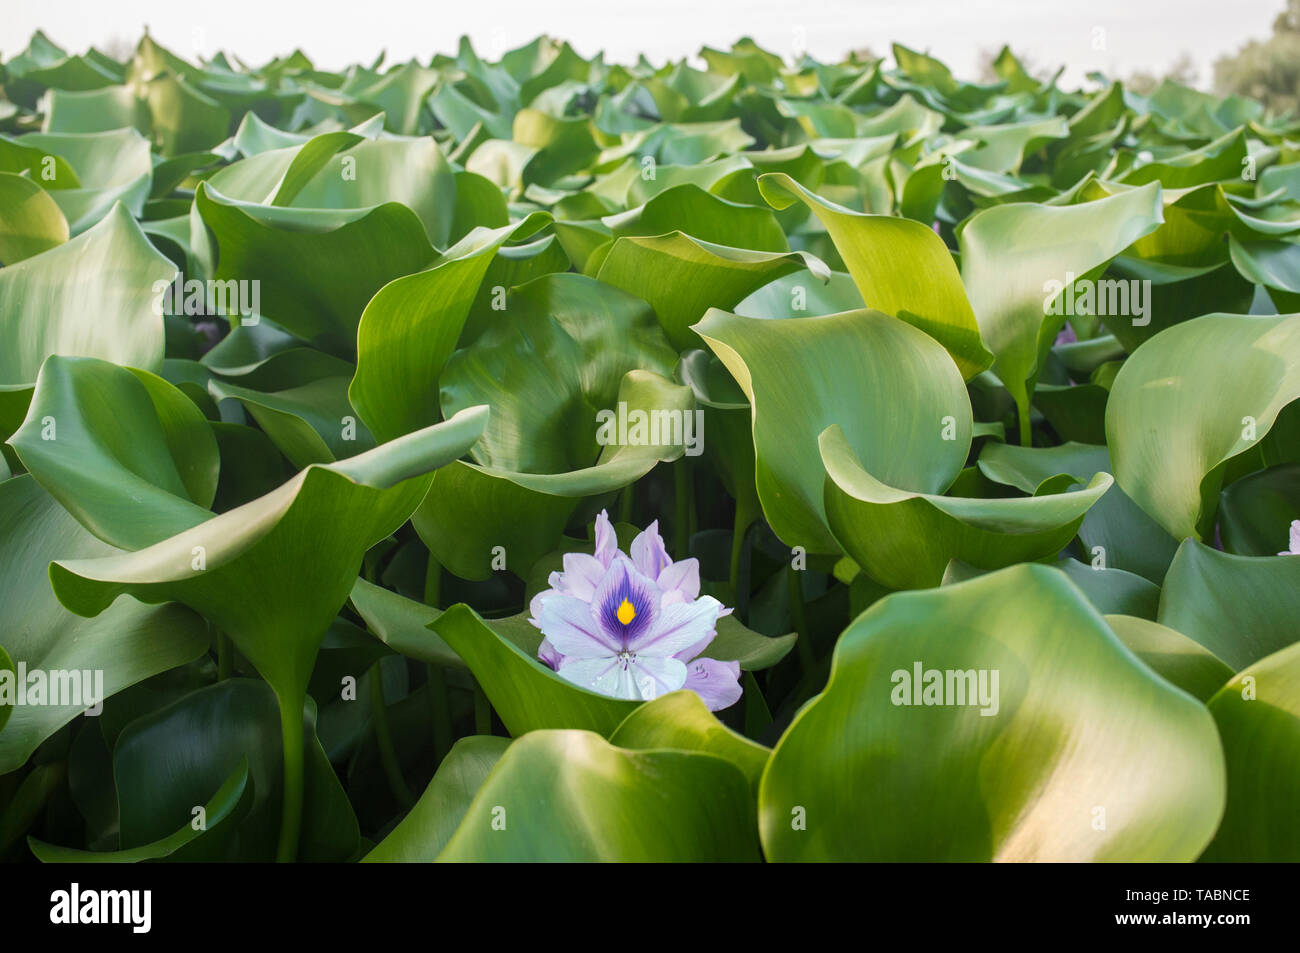 Eichhornia crassipes, commonly known as water hyacinth. Highly problematic invasive species at Guadiana River, Badajoz, Spain Stock Photo